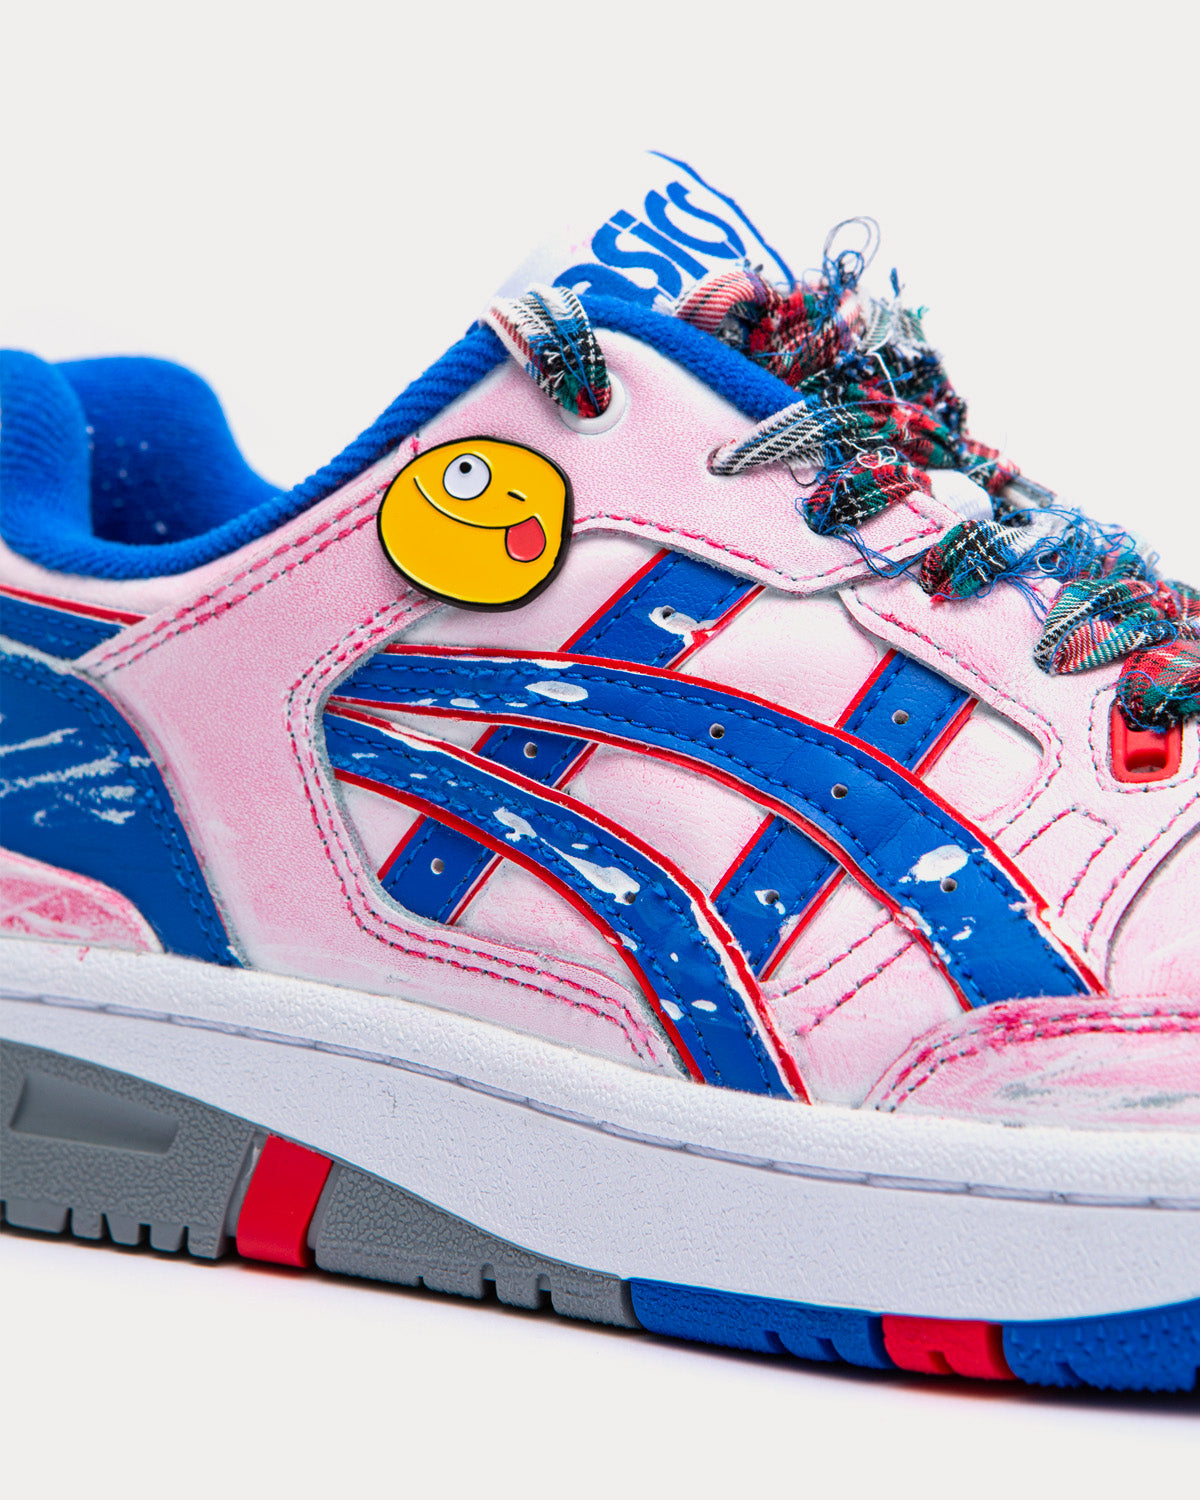 Asics x (di)vision - EX89 Pink / Cobolt / White Low Top Sneakers